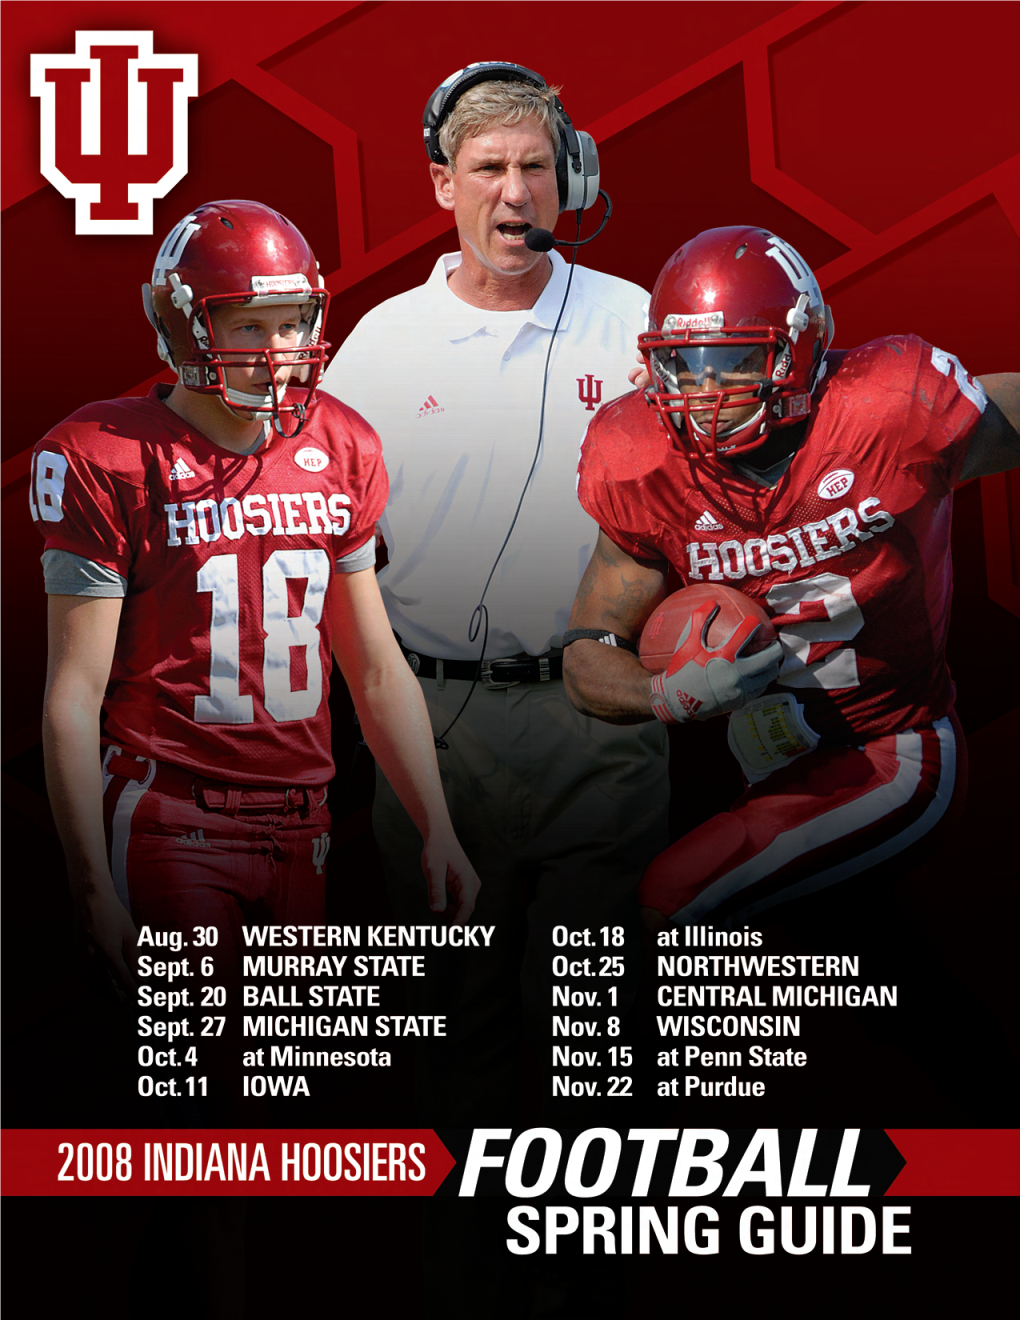 SPRING FOOTBALL 2008 INDIANA FOOTBALL SPRING SCHEDULE O Oeifrainand Information More for :0Pm Nweekdays